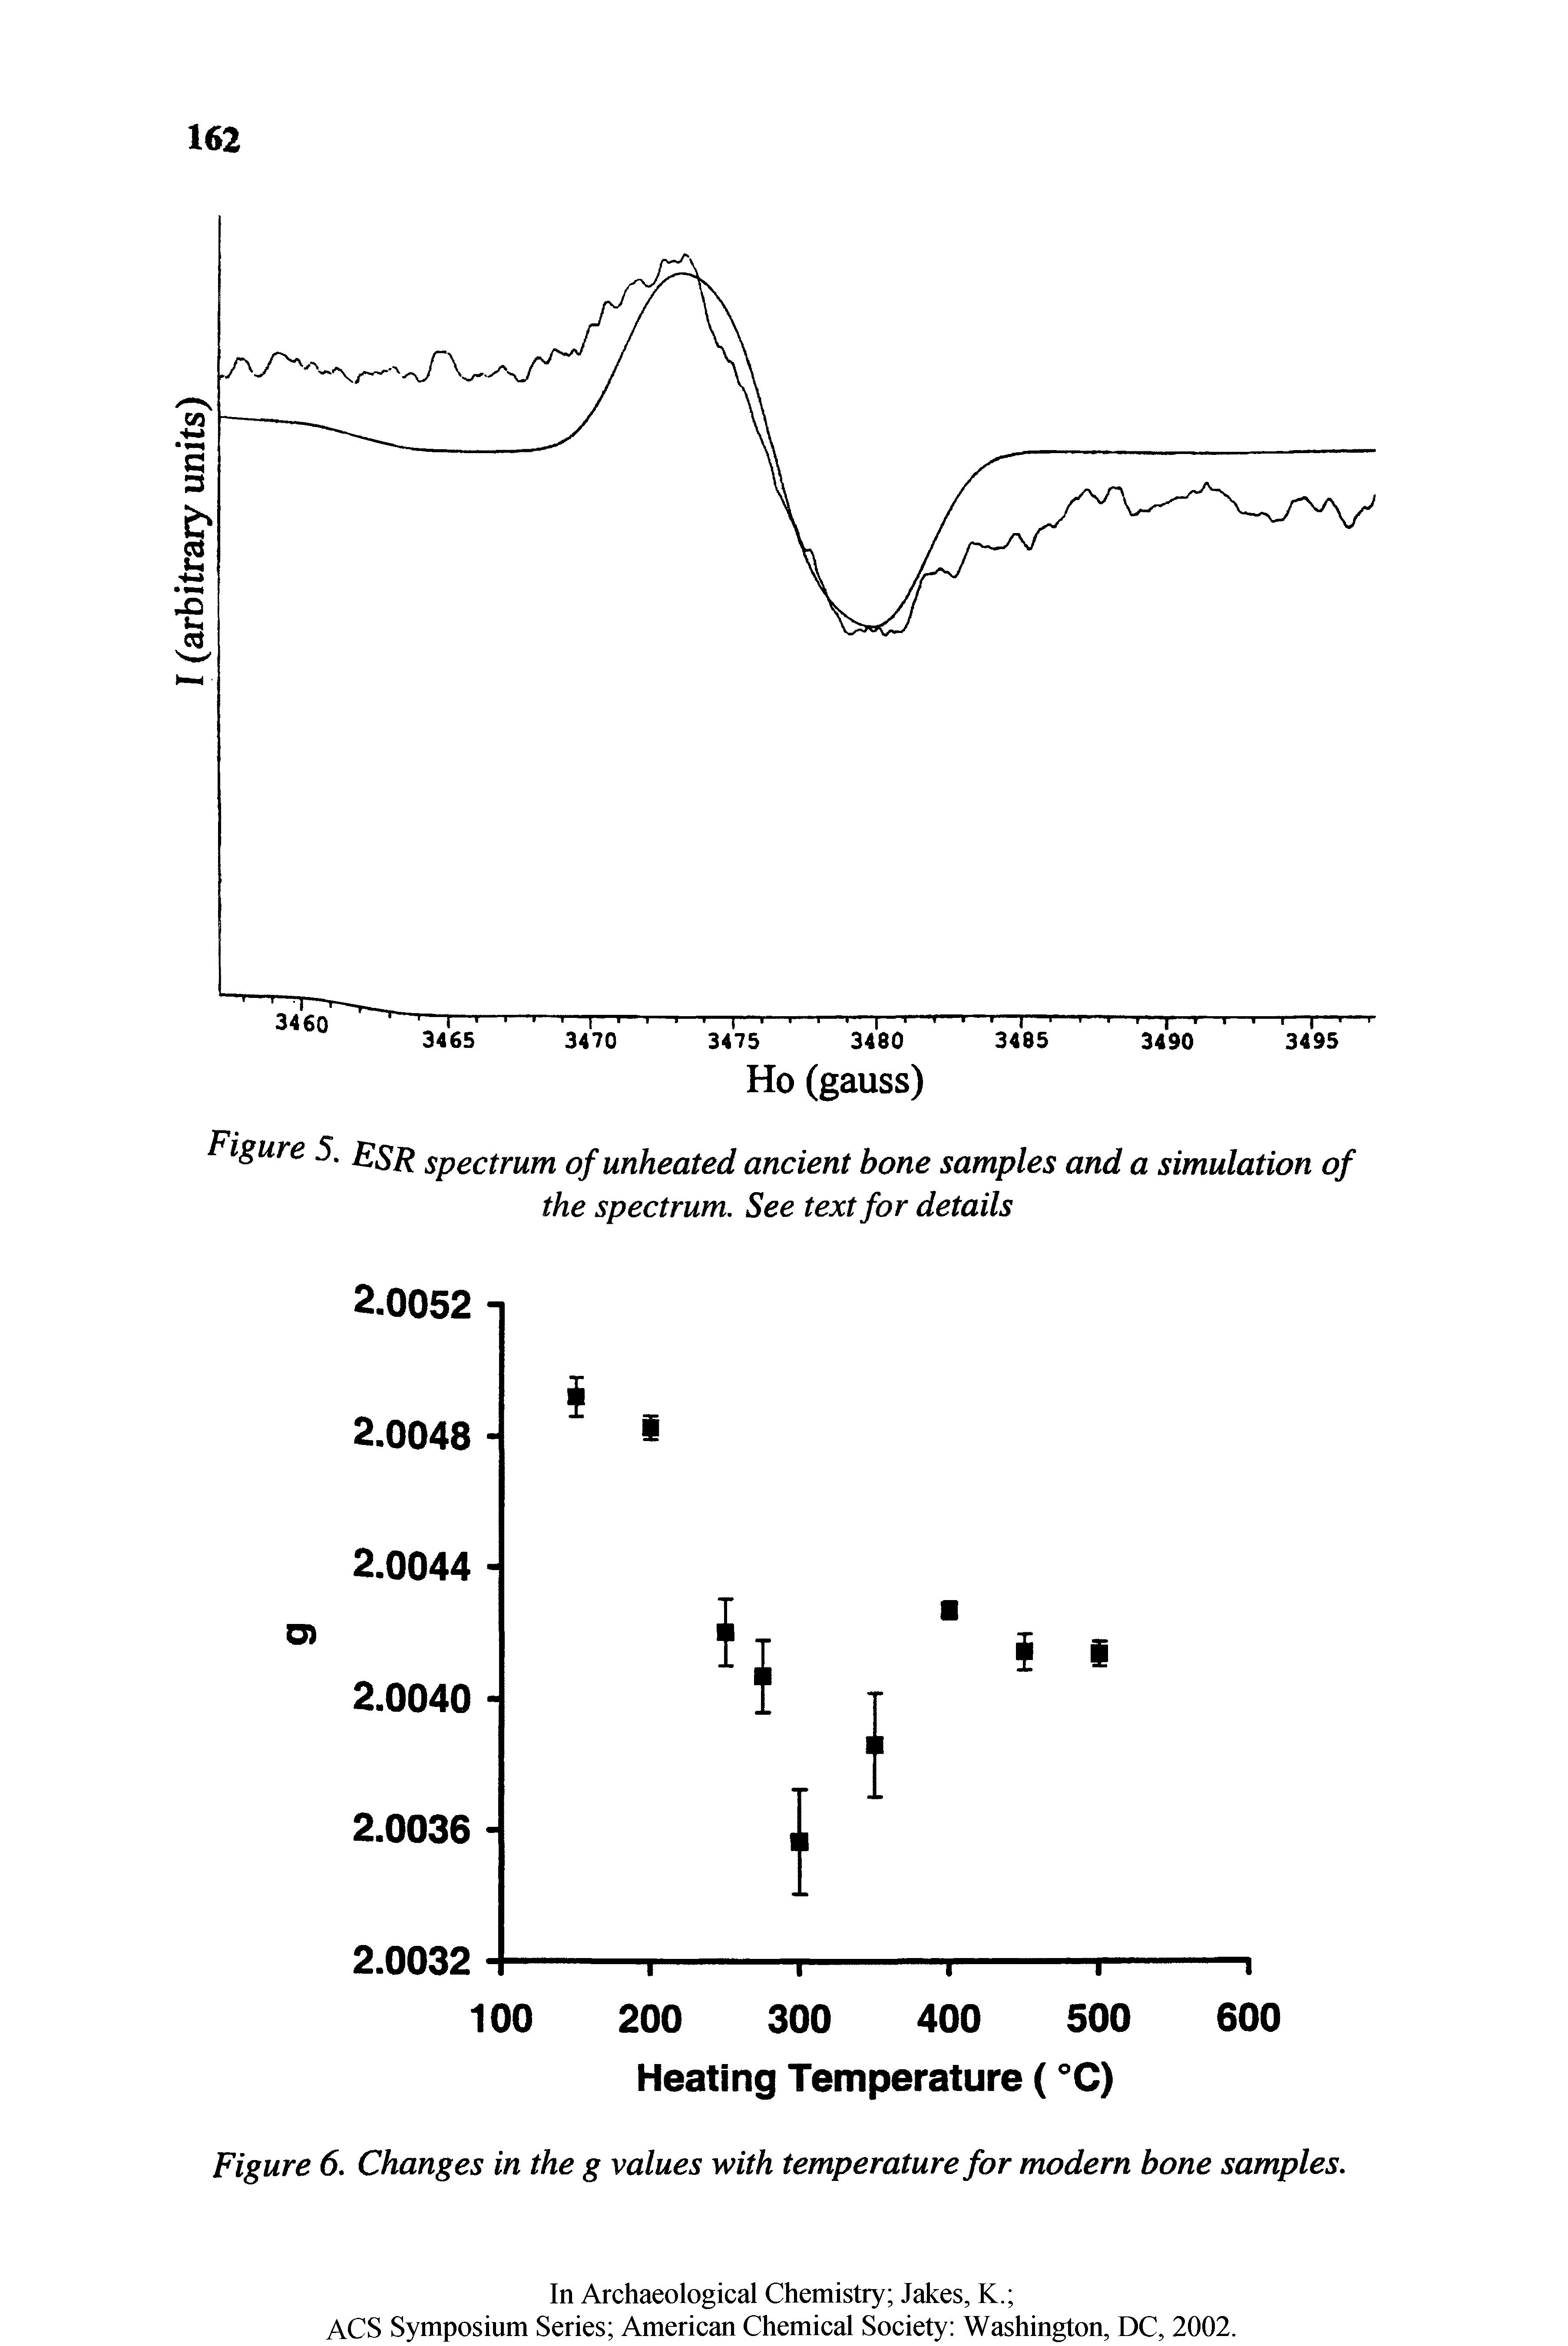 Figure 6. Changes in the g values with temperature for modern bone samples.